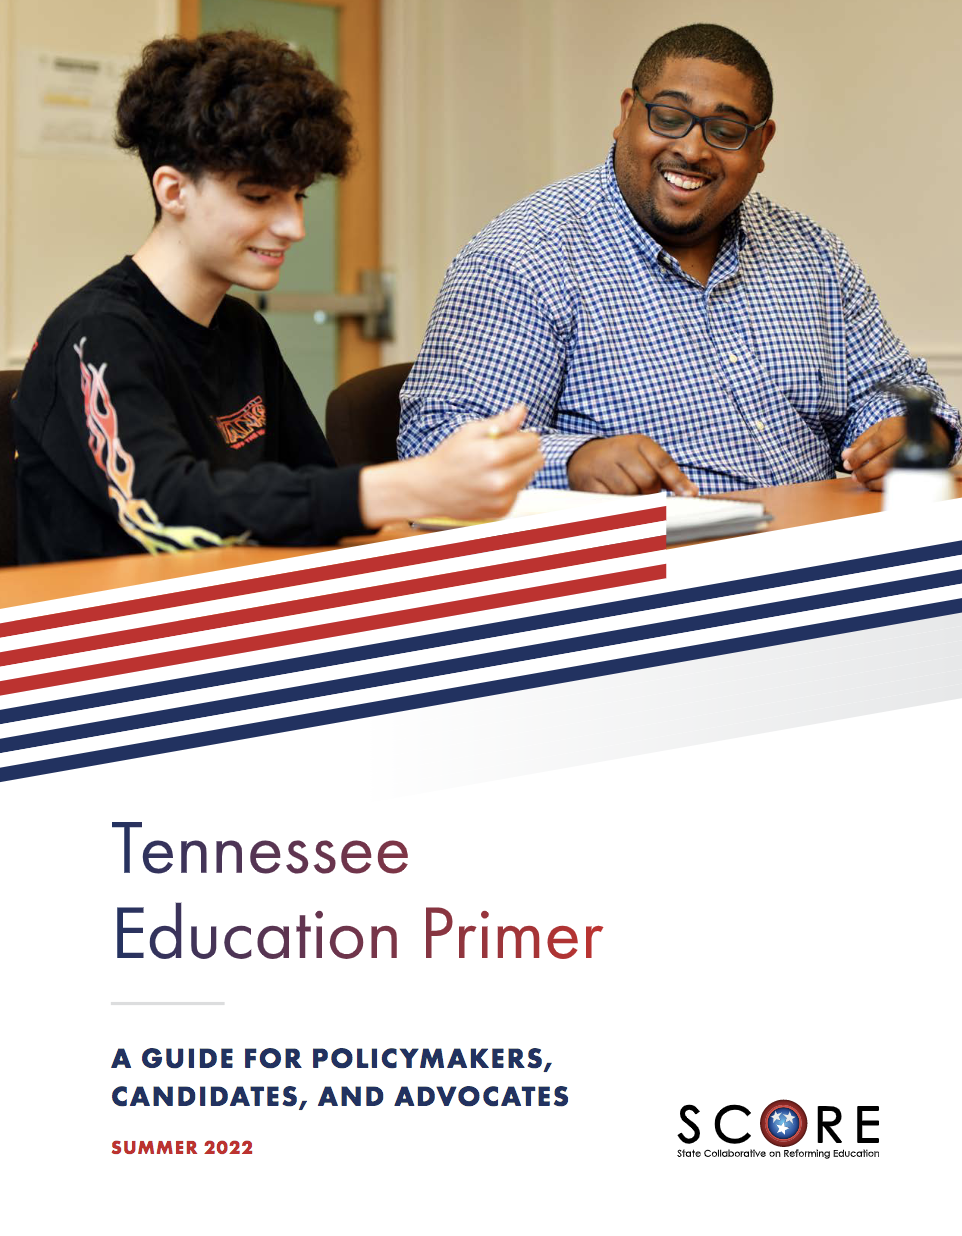 Tennessee Education Primer: A Guide For Policymakers, Candidates, And Advocates